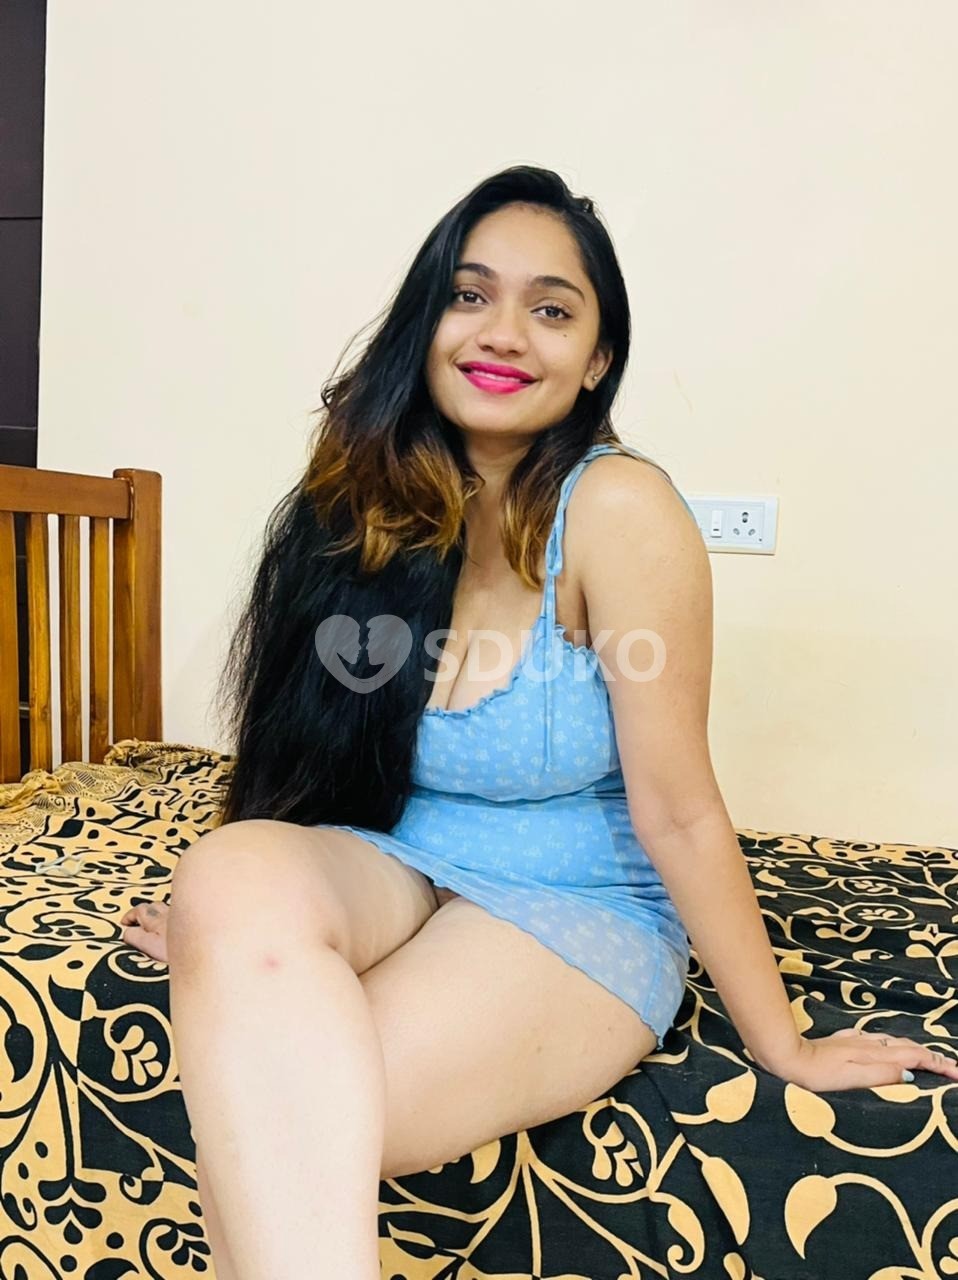 Ranchi ☎️ 7073-17-4967-call me low price available full sef and secure full enjoy hotel and home service available